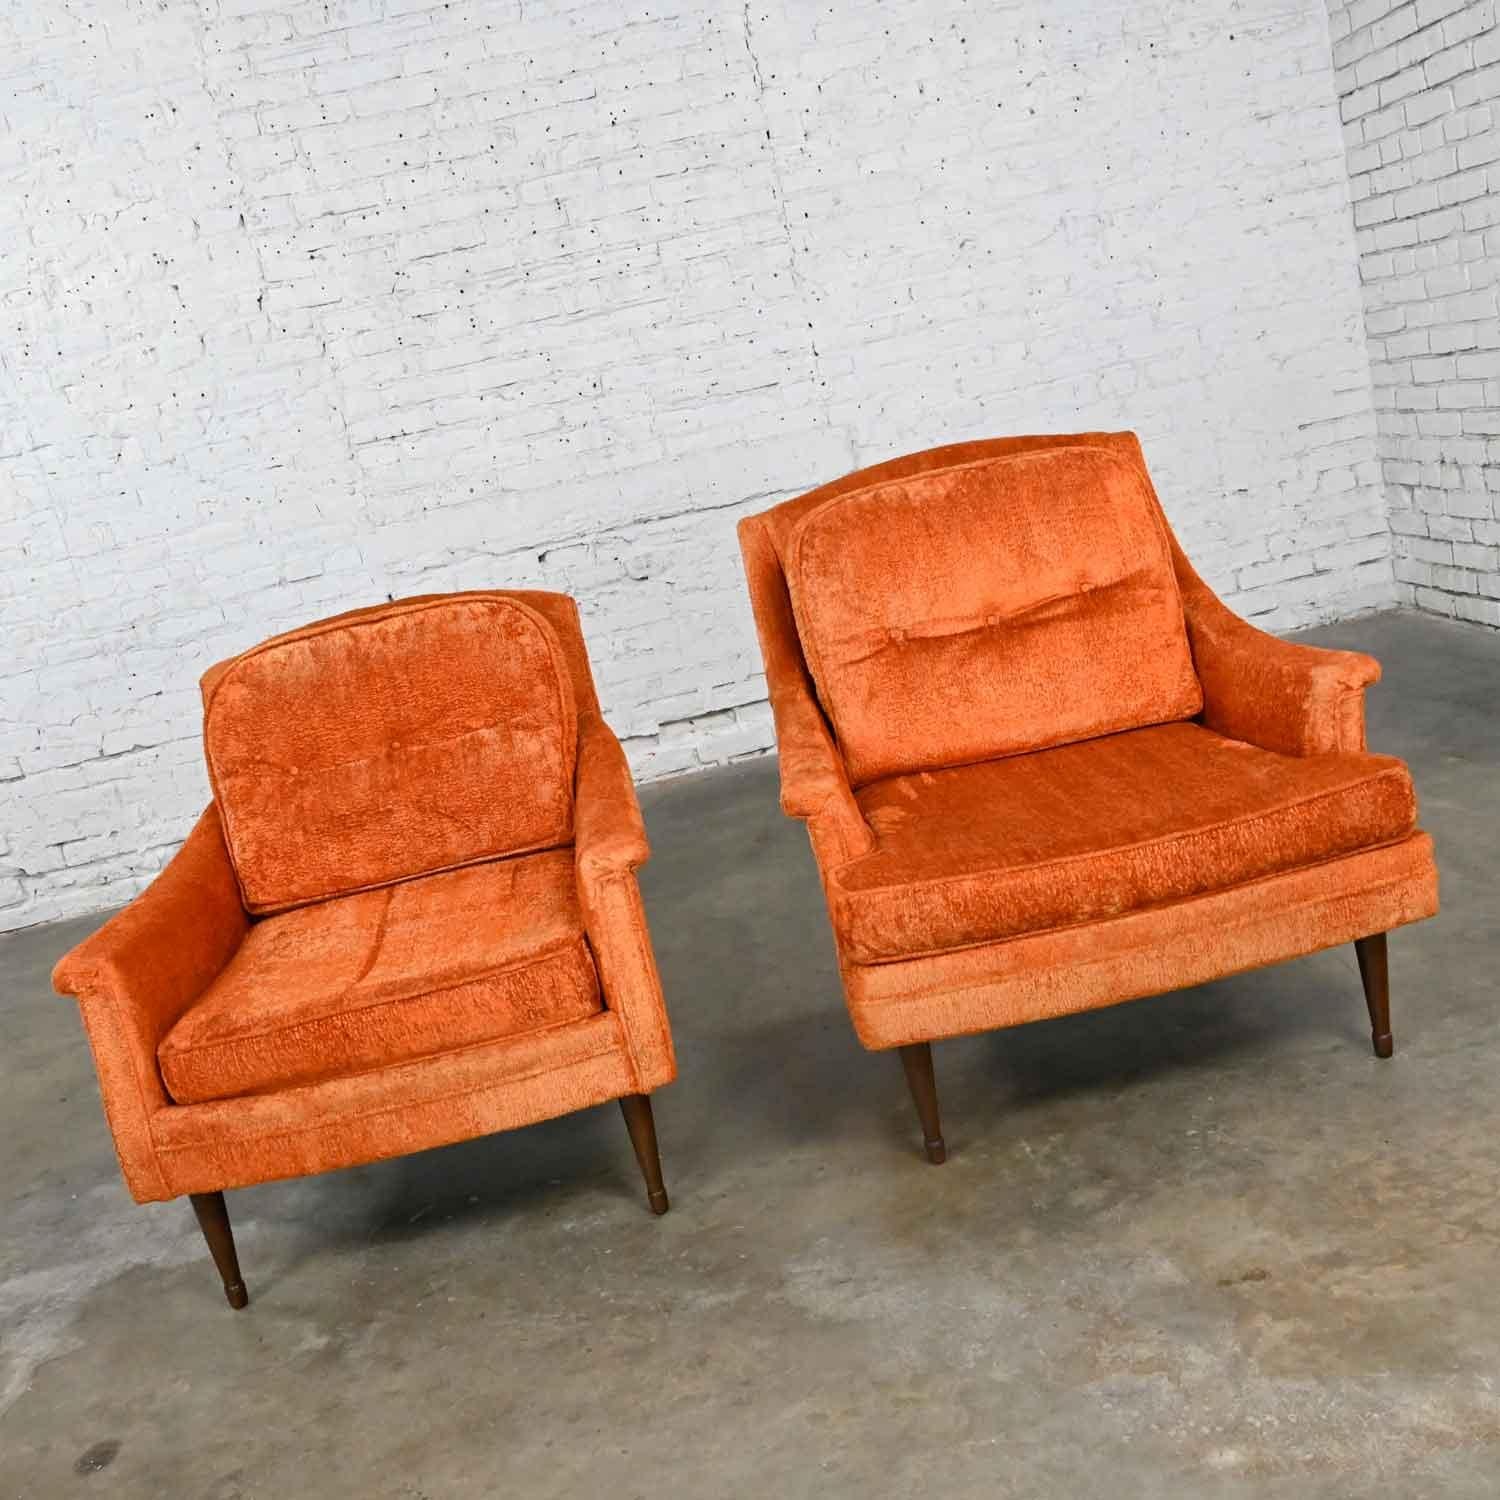 Fabulous Mid-Century Modern orange brushed chenille pair of his & hers lounge chairs. Beautiful condition, keeping in mind that these are vintage and not new so will have signs of use and wear. The outer edges of the corners of each chair have a bit